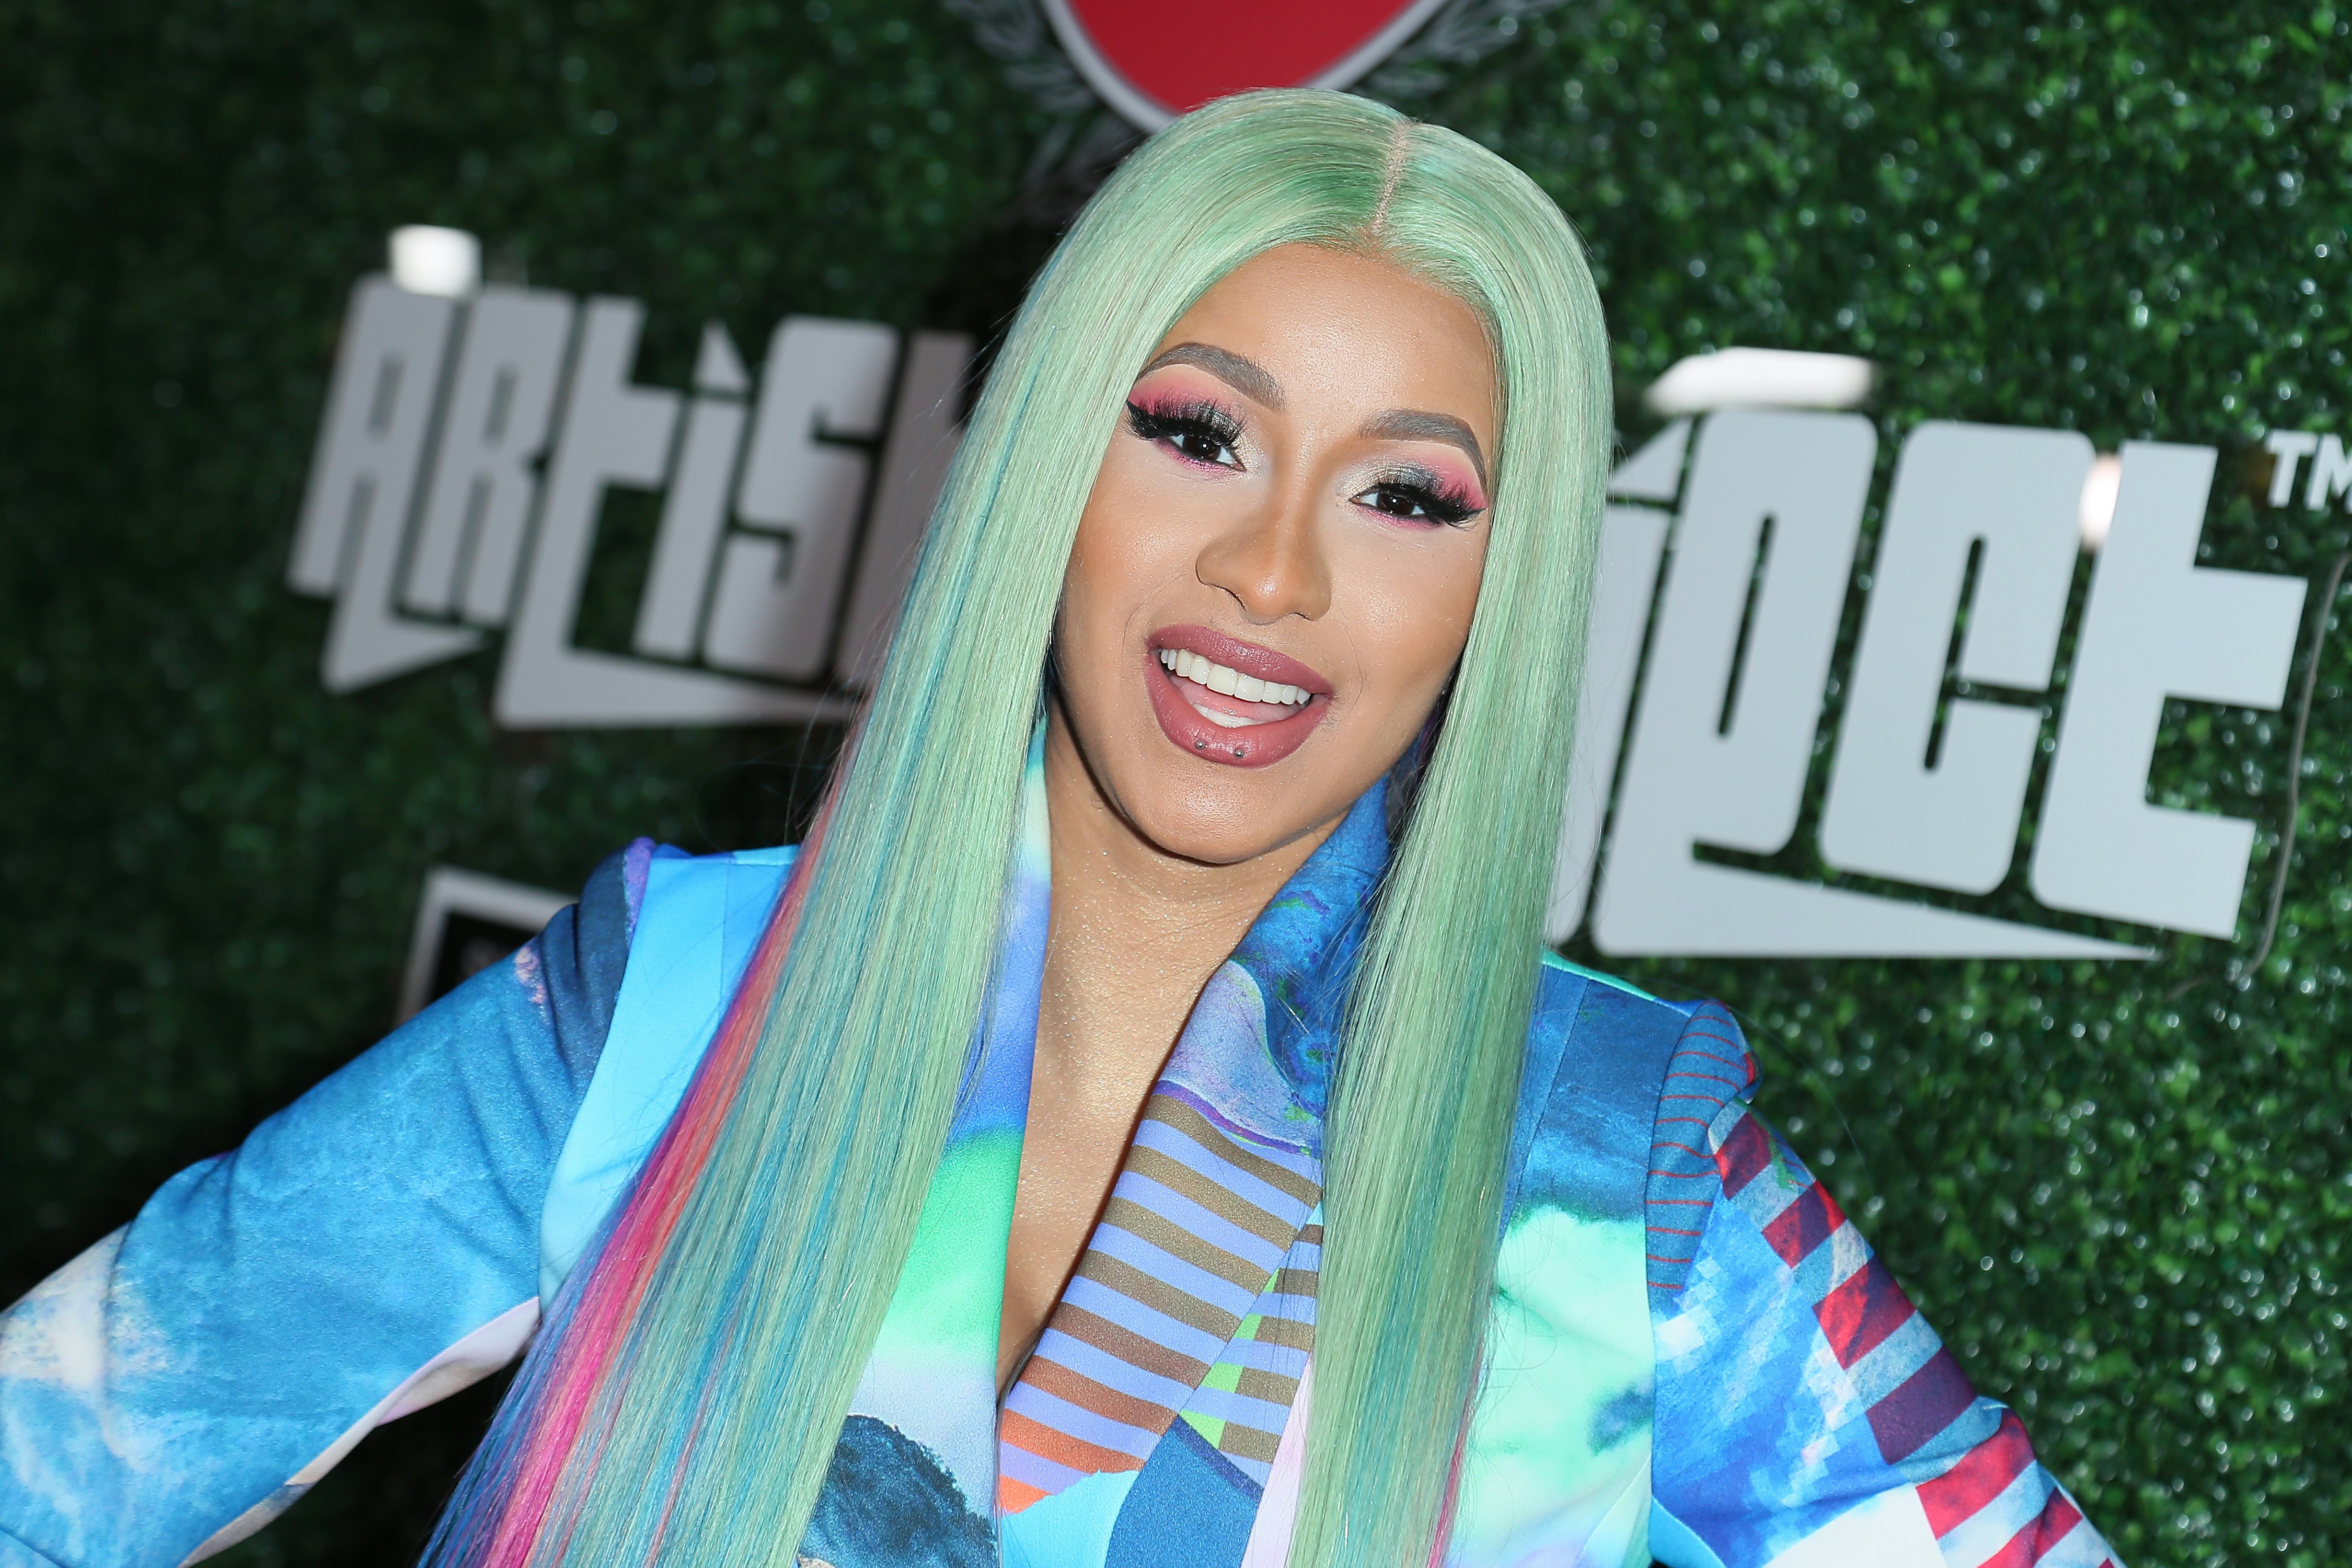 Cardi Bs Bbs Squashed In A FigureHugging Fishnet Minidress Is Giving A  Full Display Of Her Curves This NSFW Look Leaves Nothing to the  Imagination